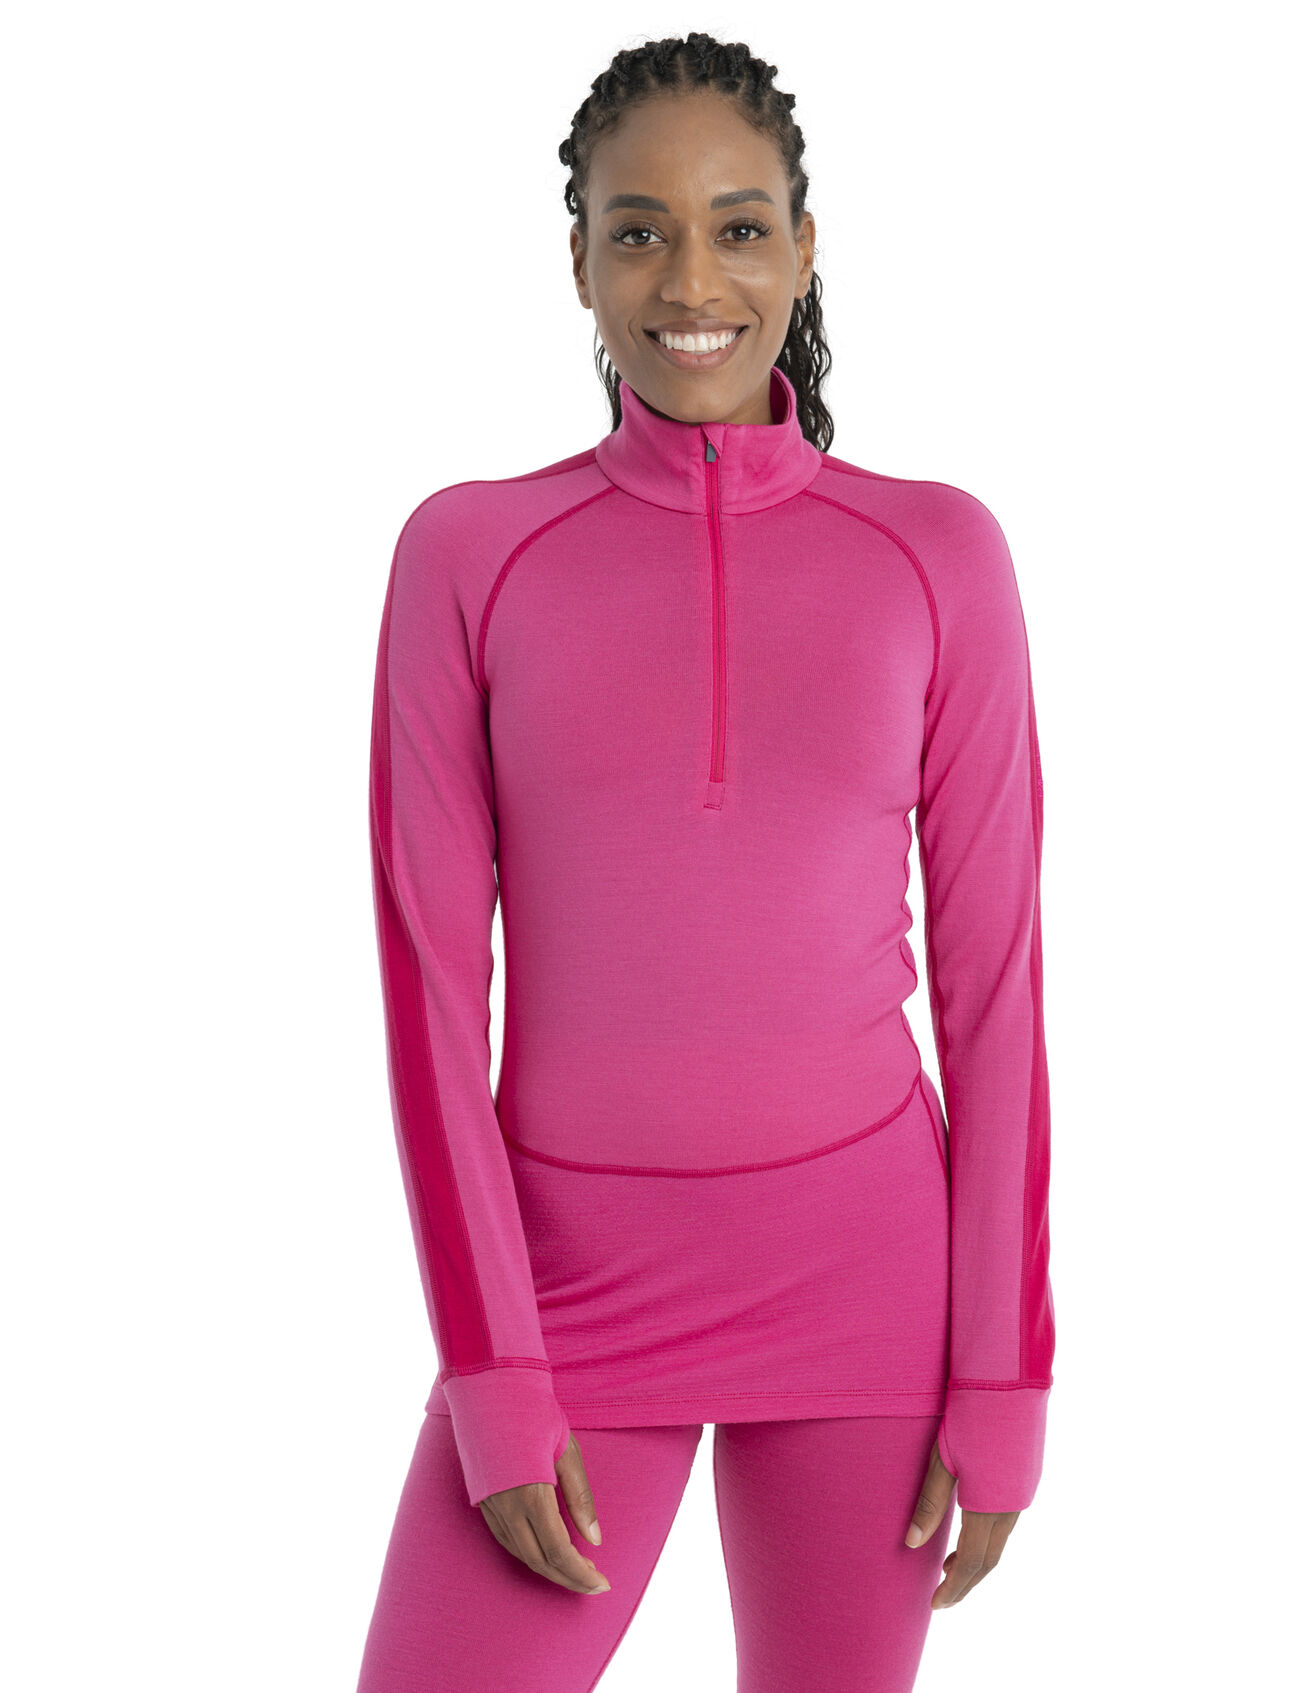 Womens 260 ZoneKnit™ Merino Long Sleeve Half Zip Thermal Top A heavyweight merino base layer top designed to help regulate temperature during high-intensity activity, the 260 ZoneKnit™ Long Sleeve Half Zip feature 100% pure and natural merino wool.